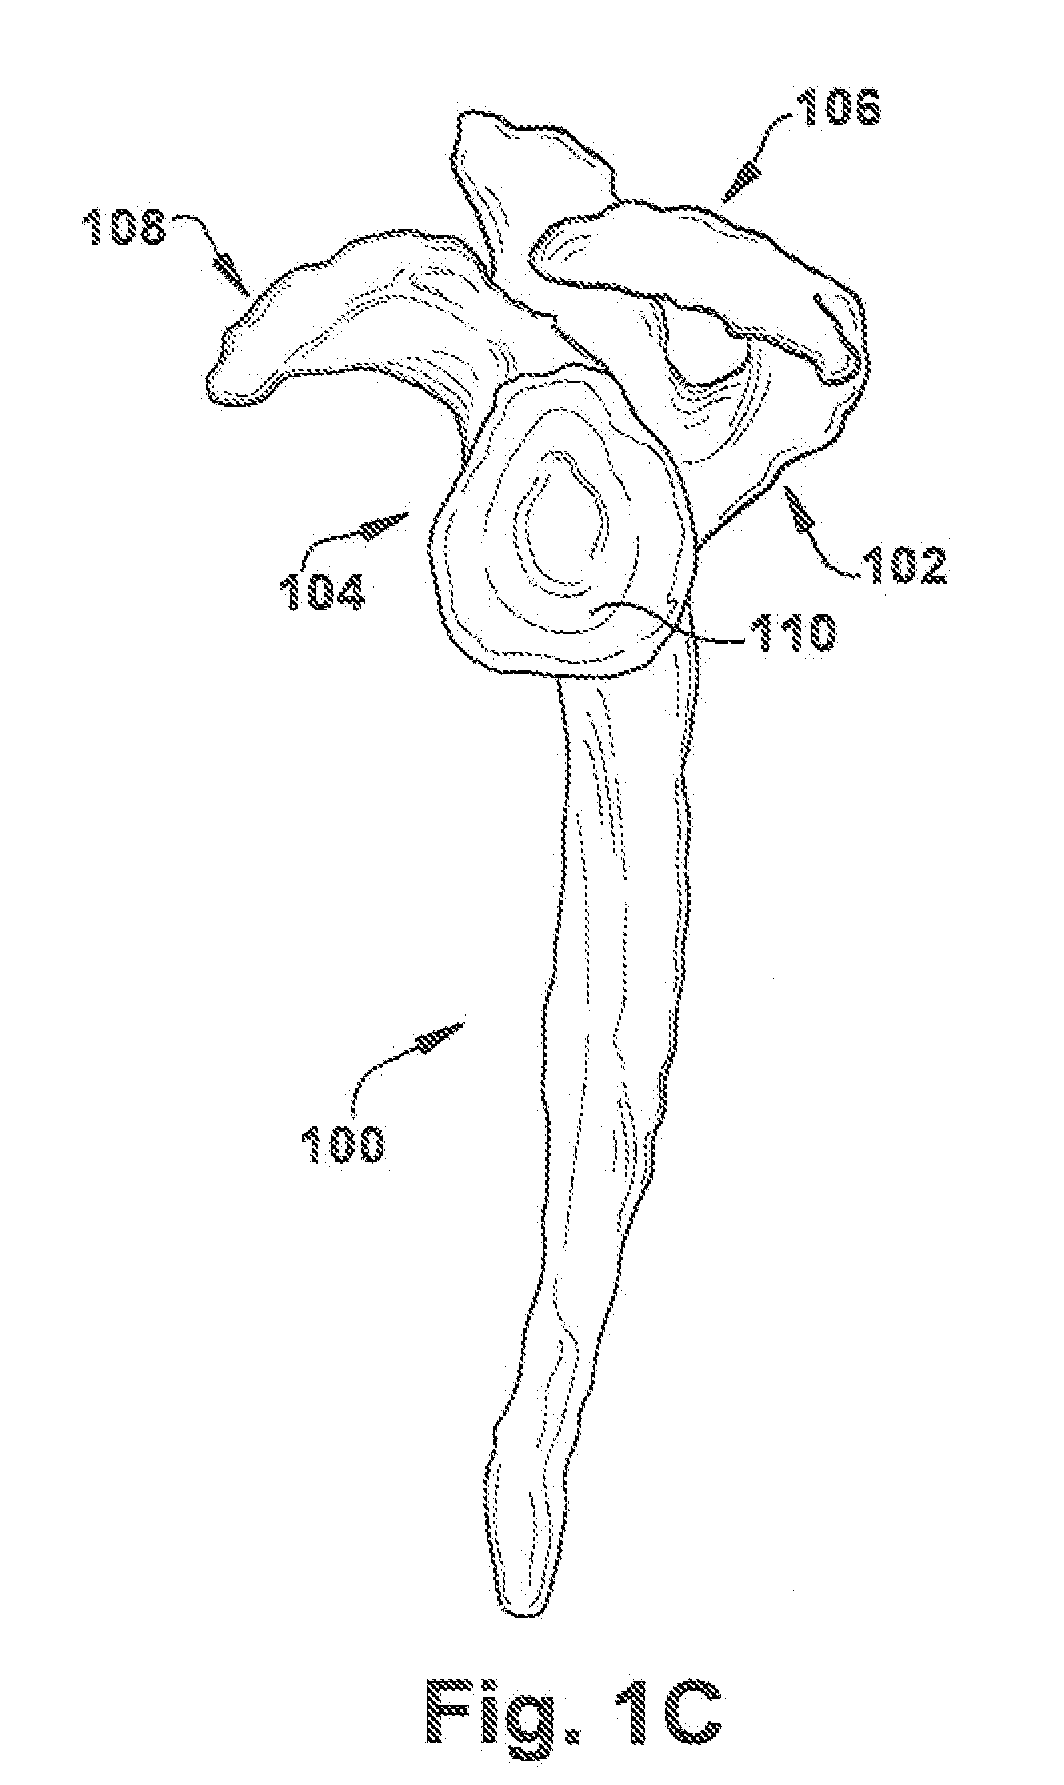 Method and apparatus for preparing for a surgical procedure